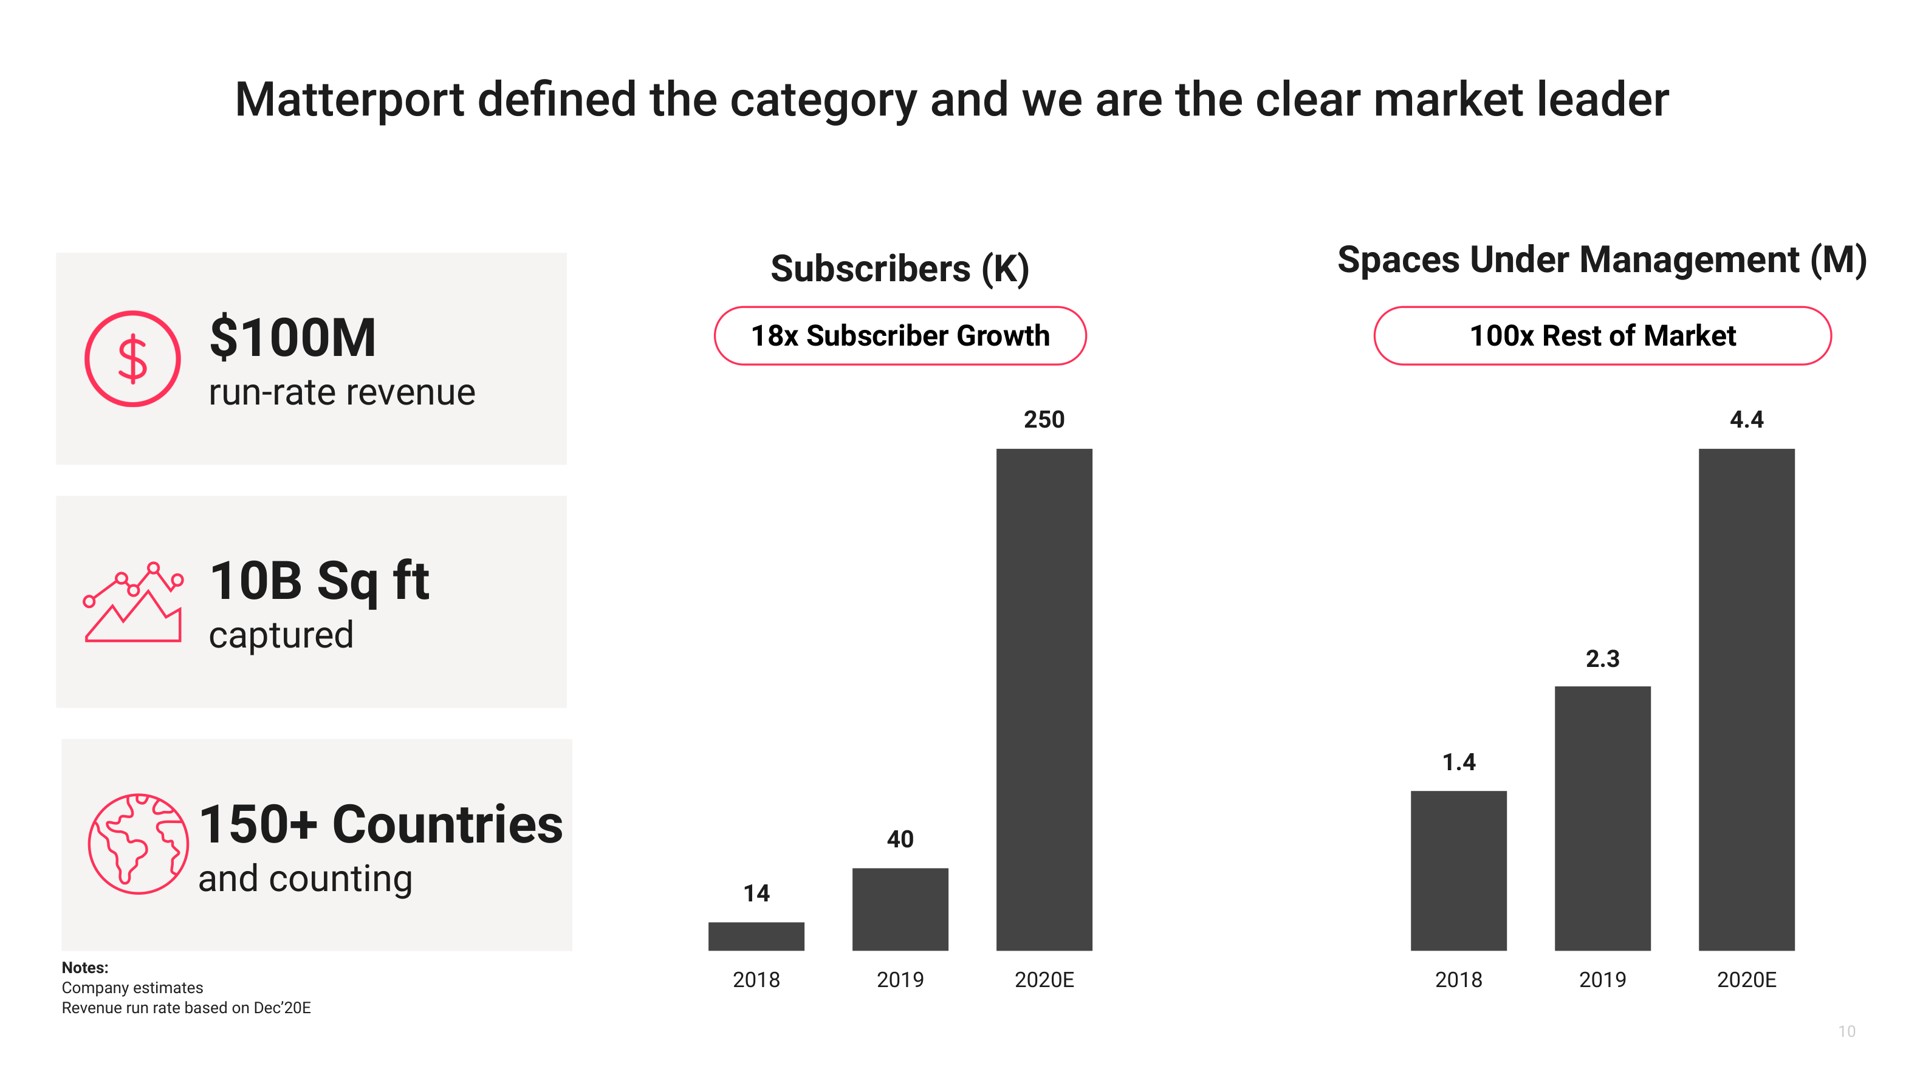 run rate revenue captured subscribers spaces under management countries and counting defined the category we are the clear market leader | Matterport